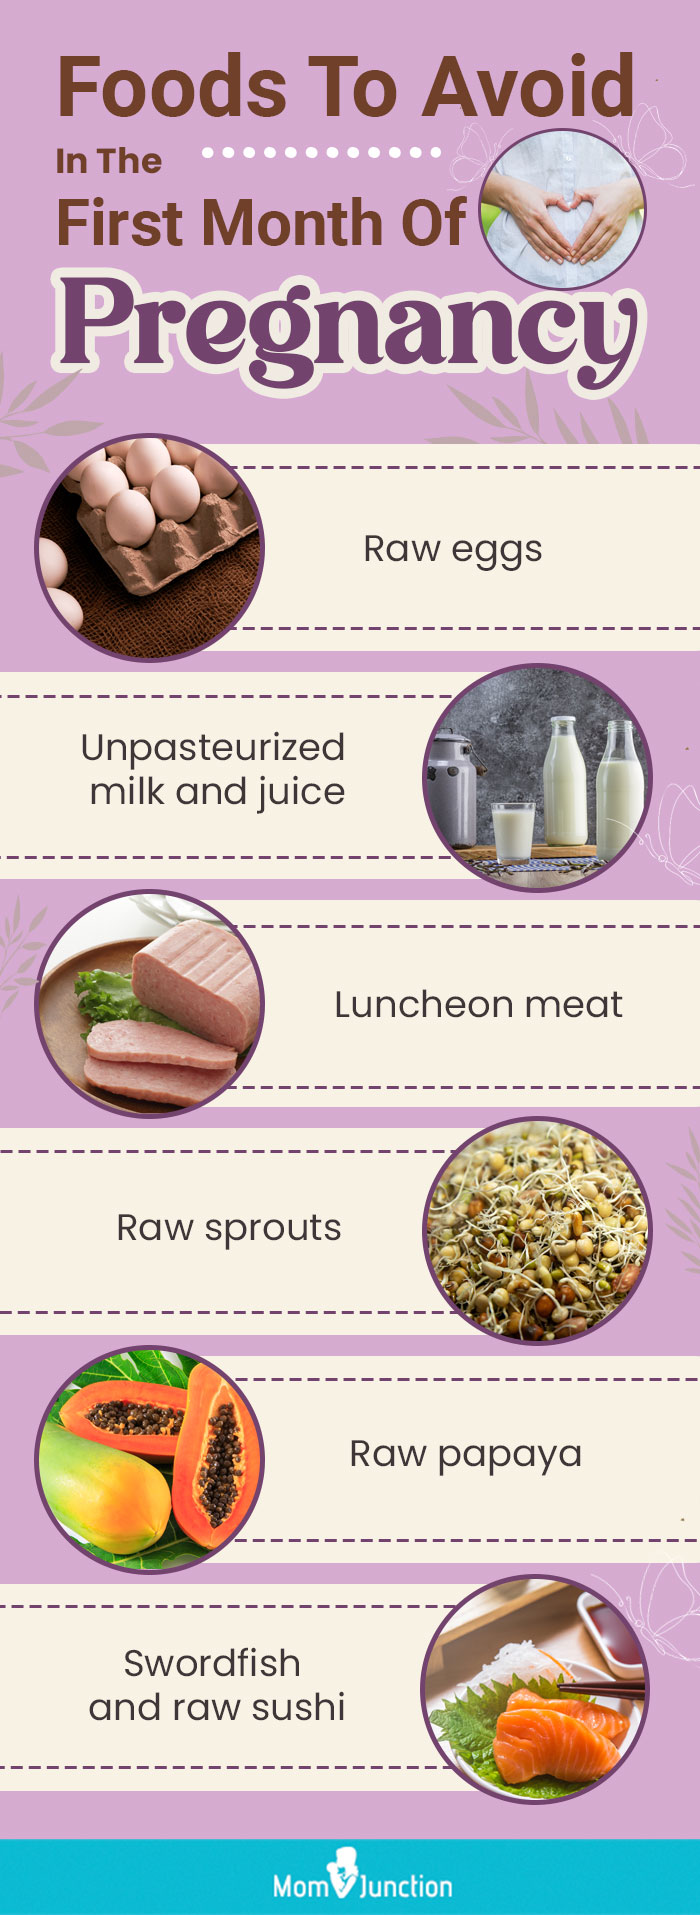 foods to avoid in the first month of pregnancy (infographic)